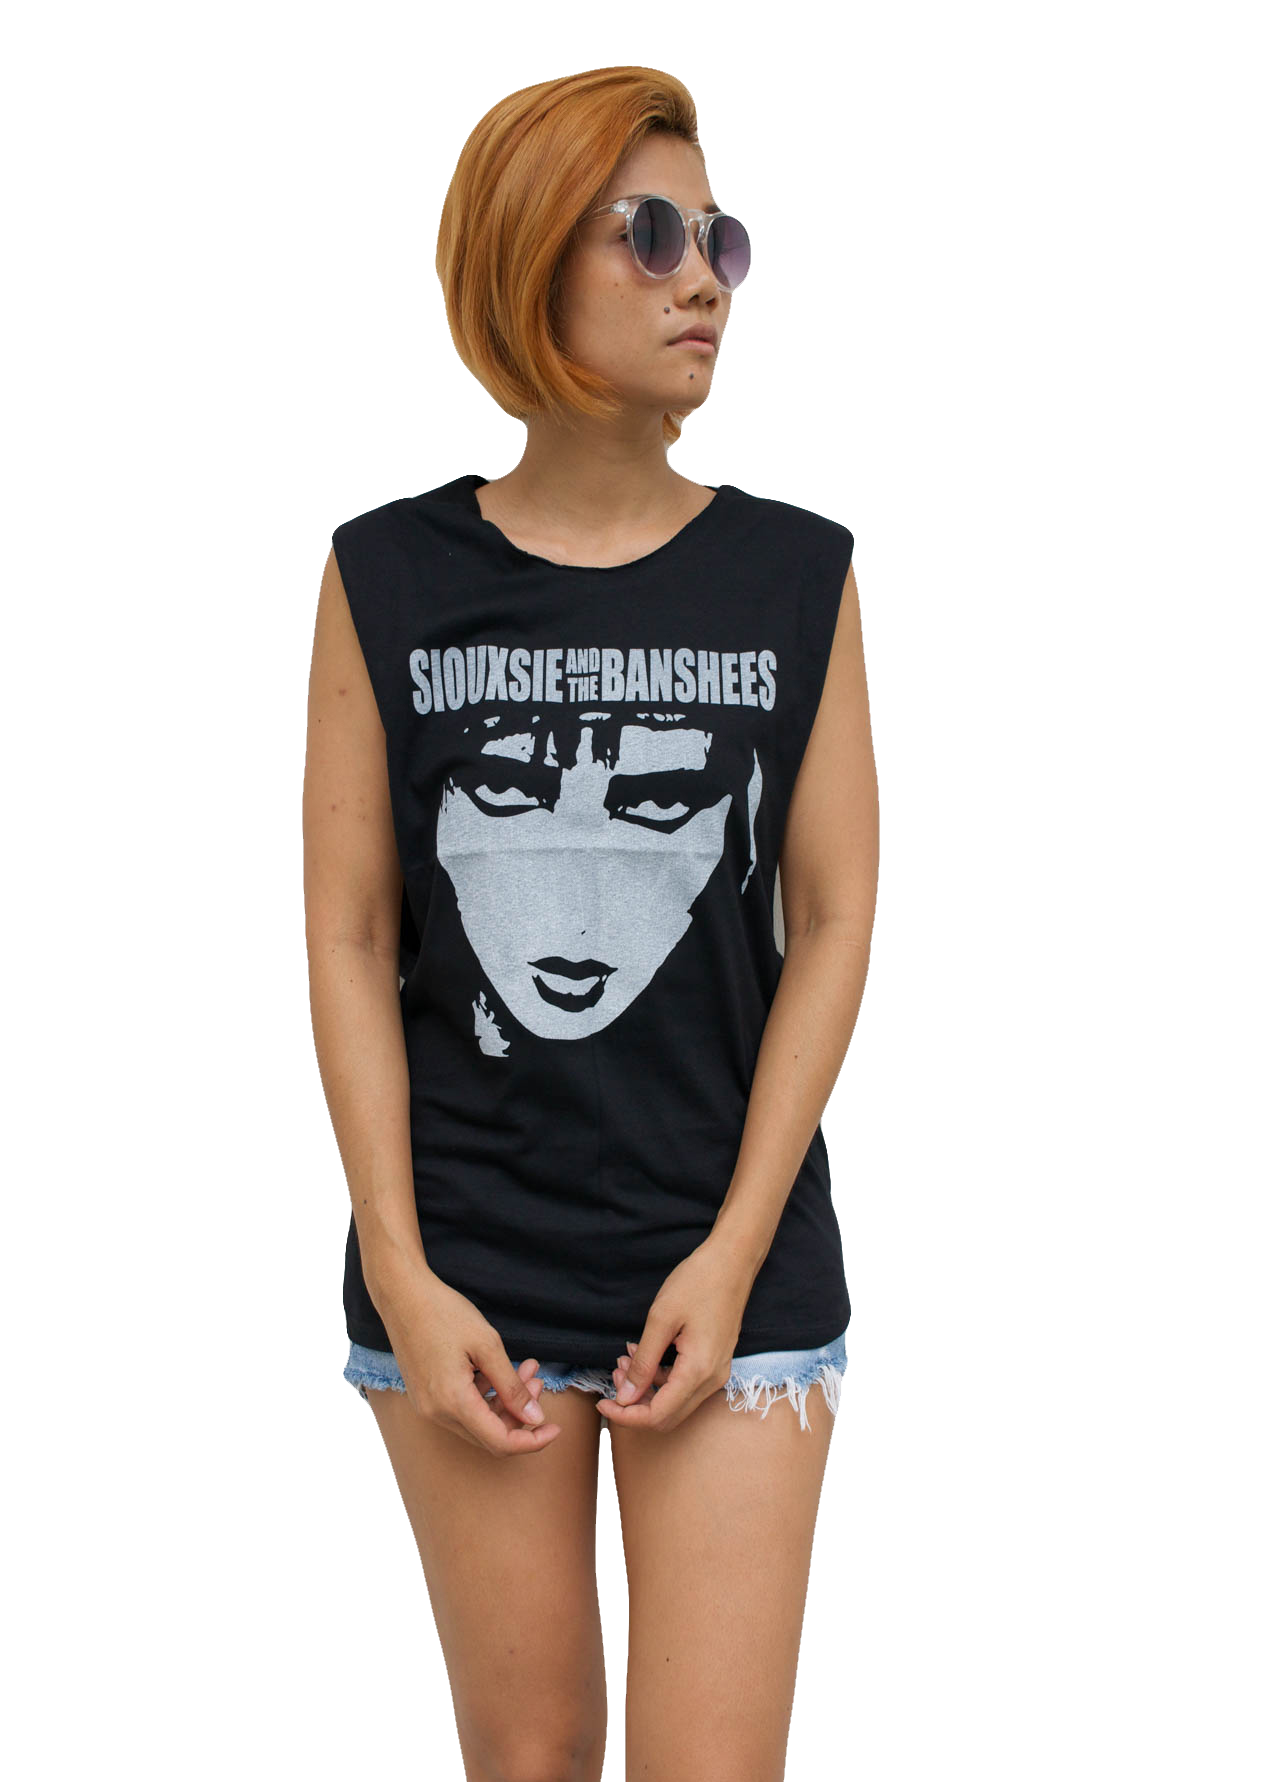 Ladies Siouxsie And The Banshees Vest Tank-Top Singlet Sleeveless T-Shirt